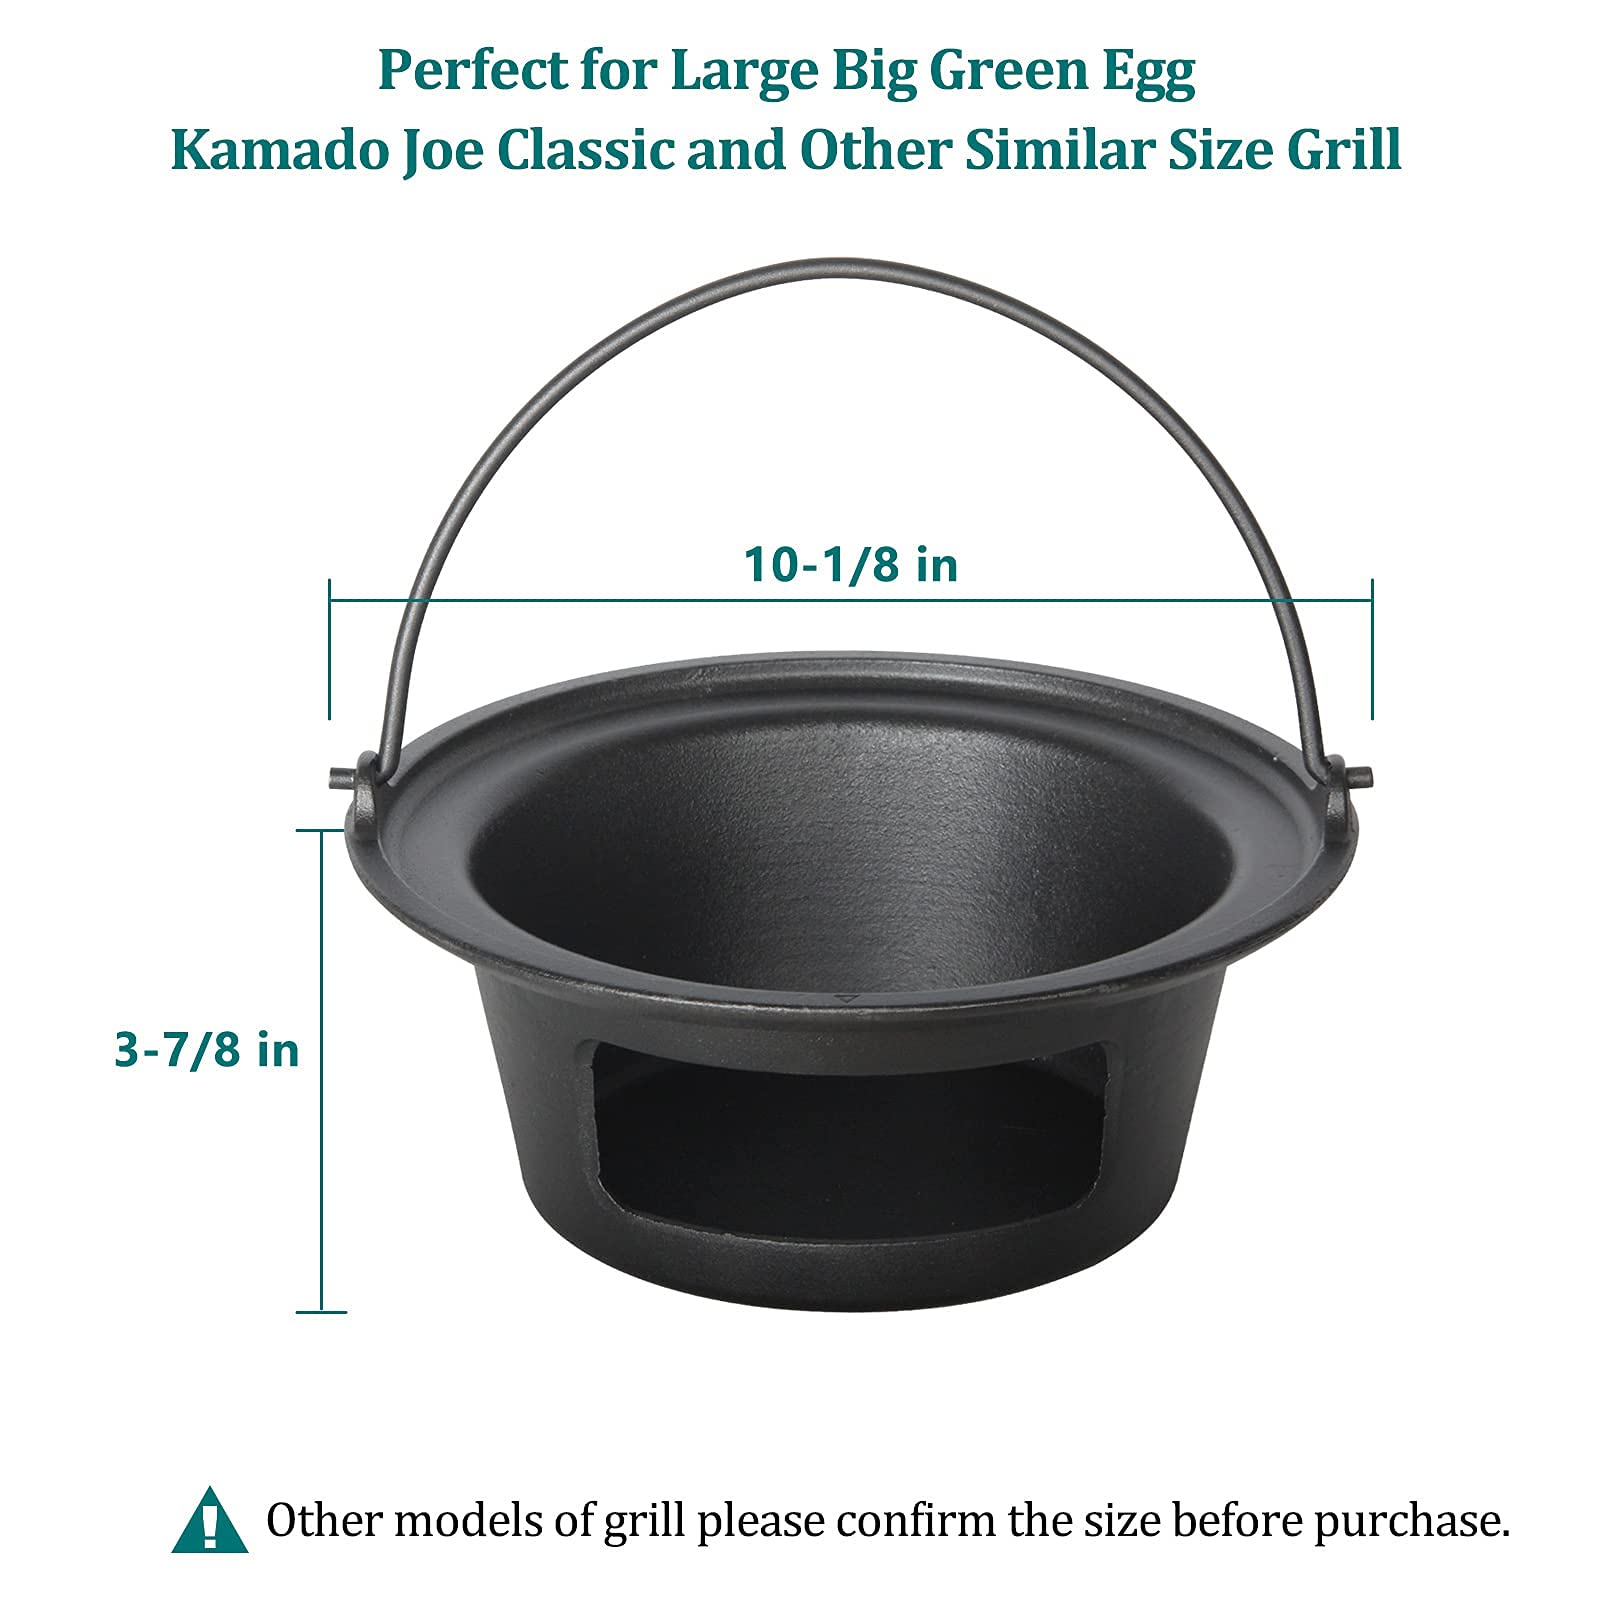 KAMaster Cast Iron Ash Can with Fire Grate for Large Big Green Egg